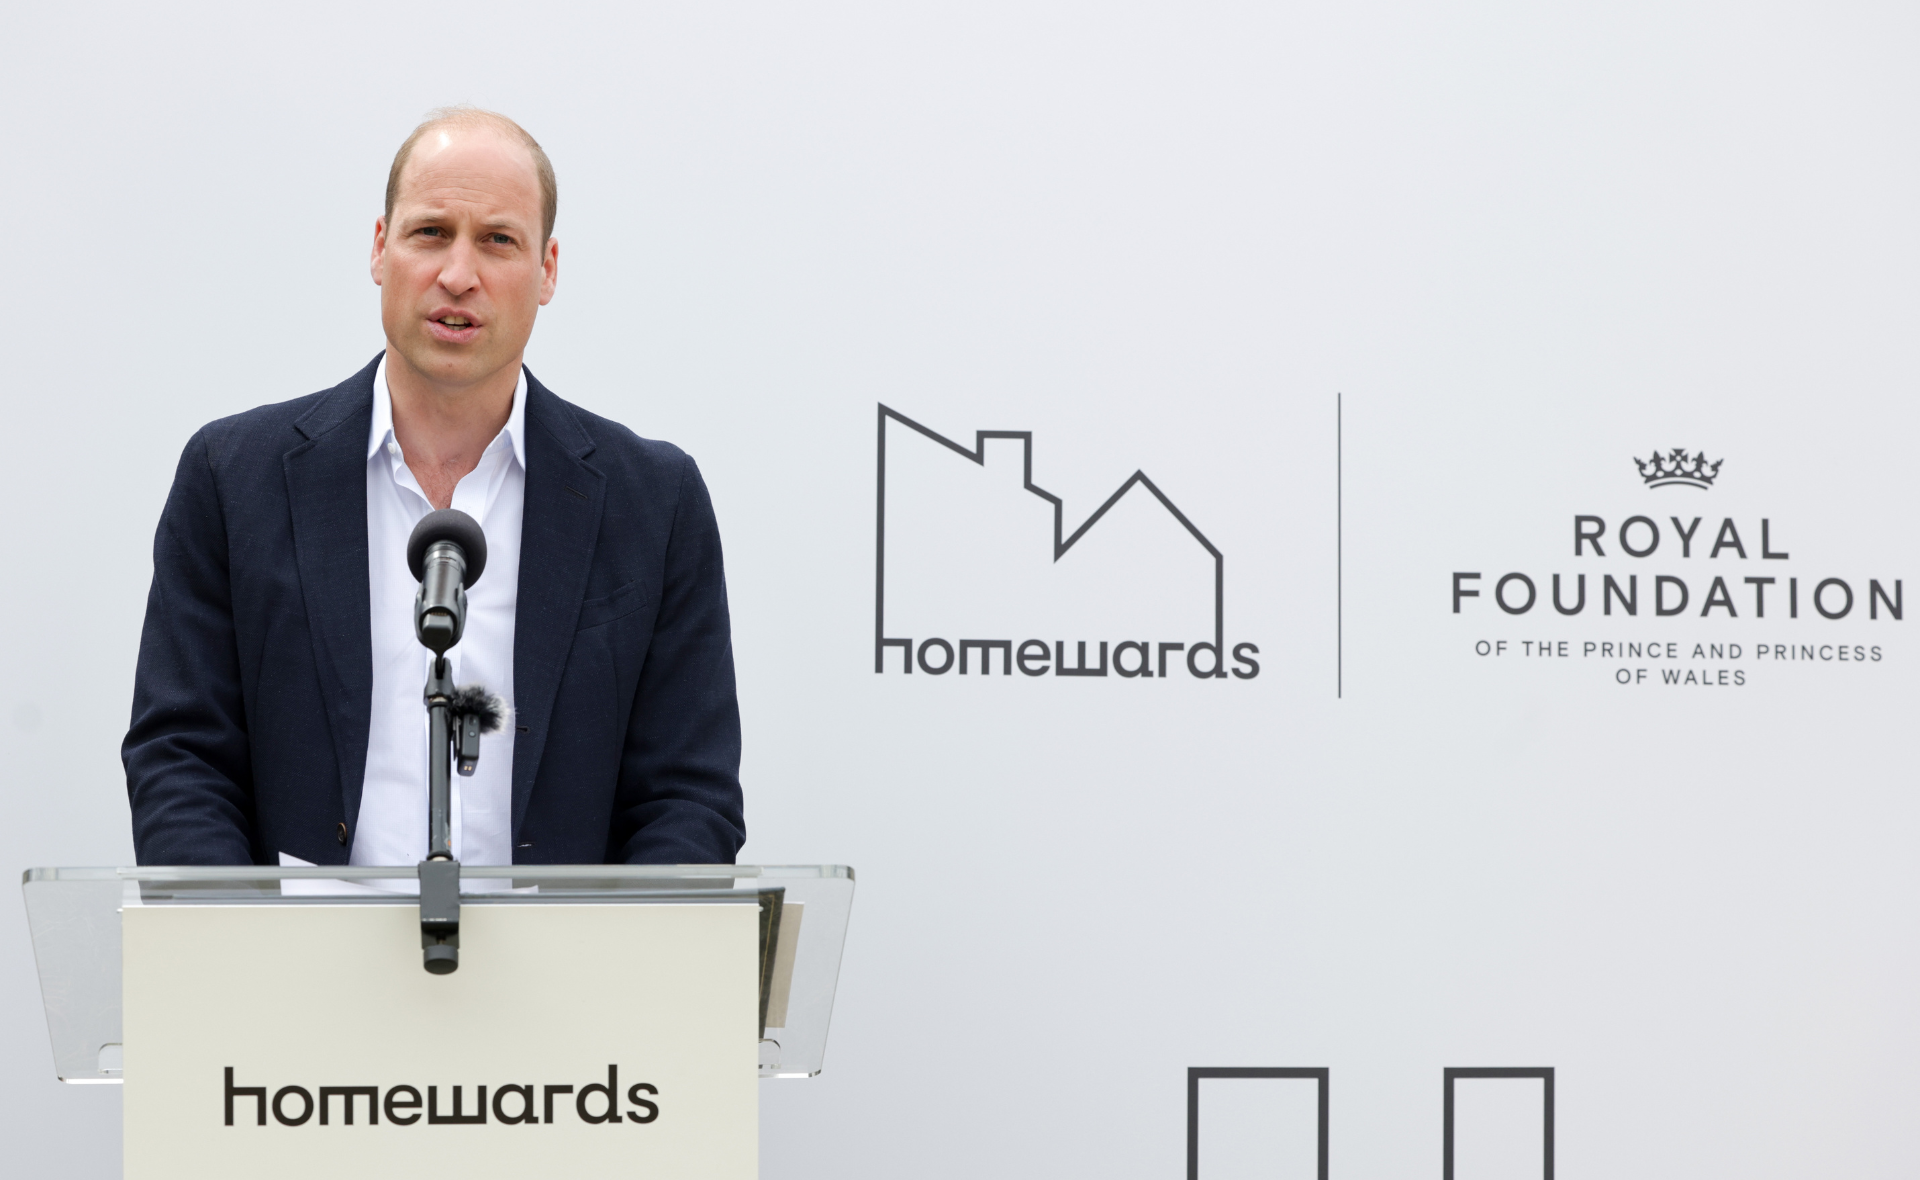 Prince William launches his Royal Foundation initiative to end homelessness